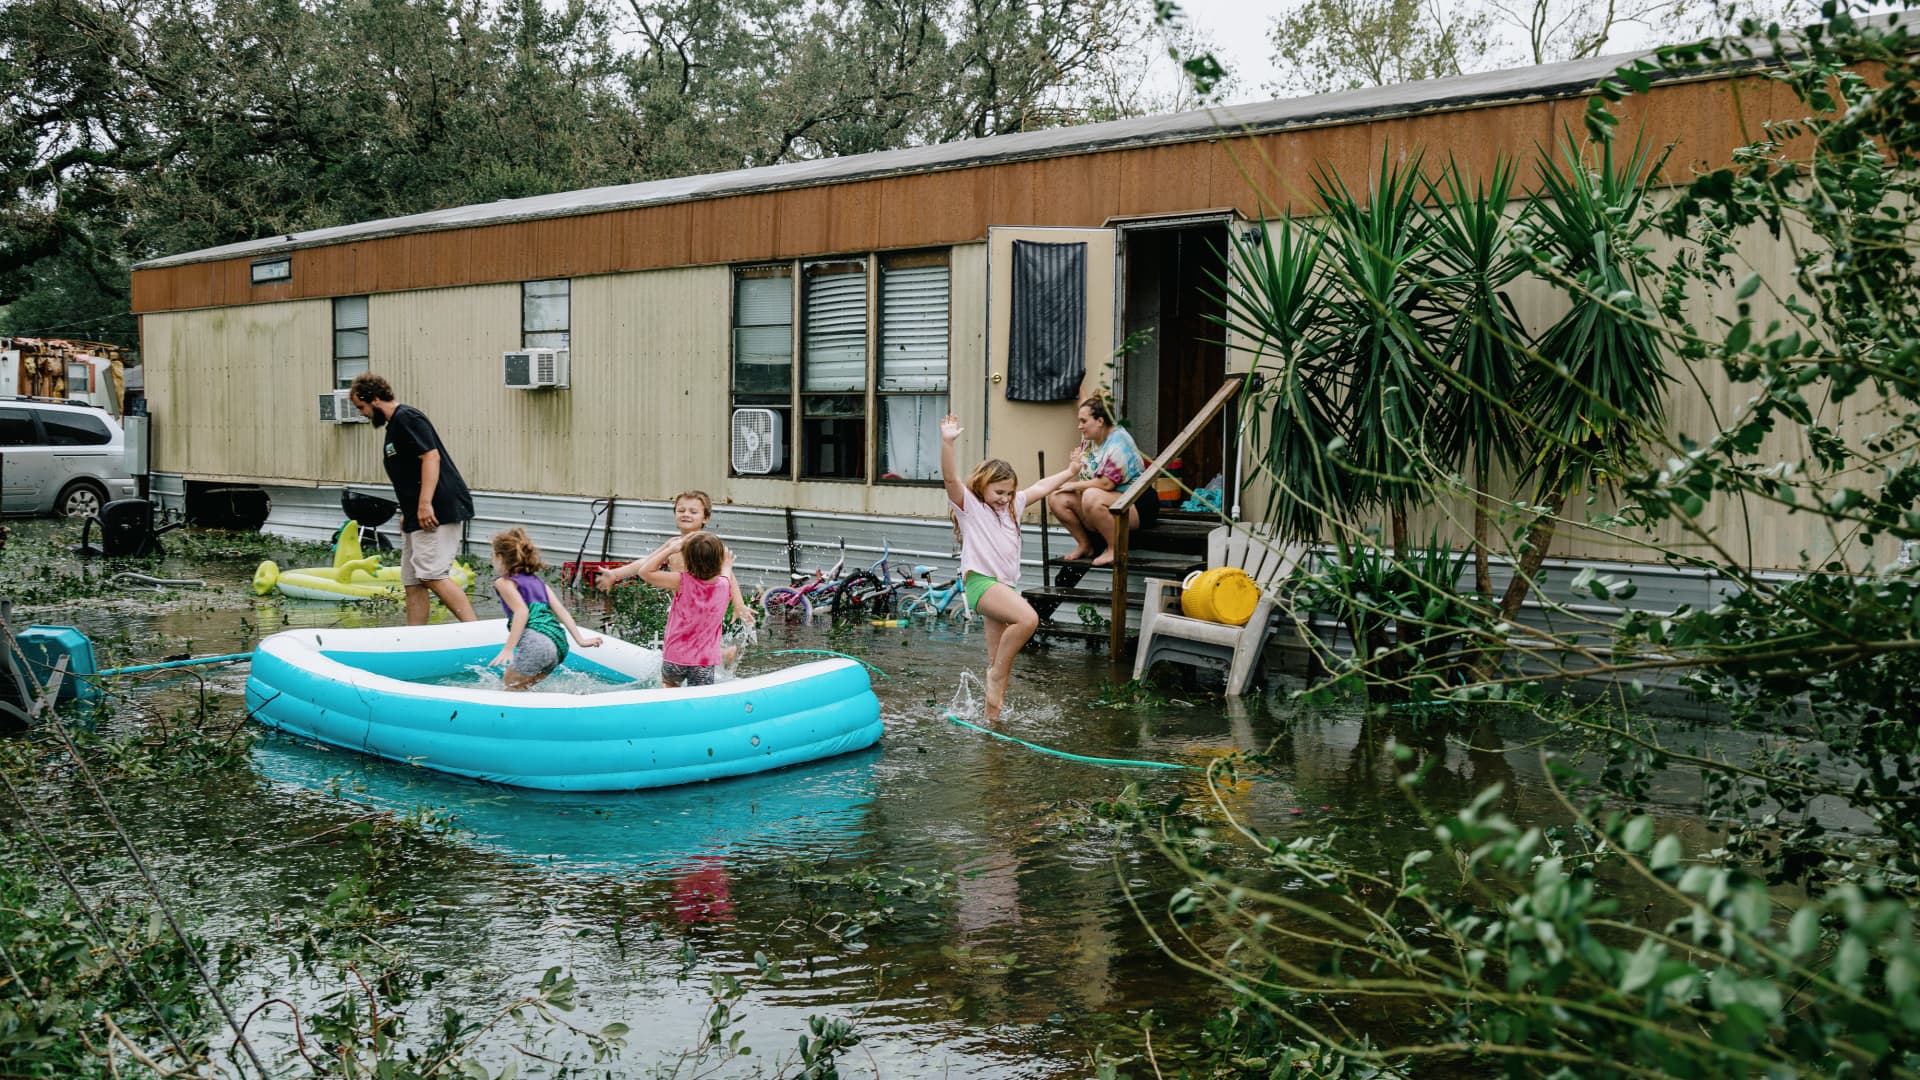 Clinton and Randal Ream with their son Saylor and daughter Nayvie and two neighbors Aubrey Miller and Harmony Morgan at their home in a small trailer park in West Pensacola. The area received a lot of damage after Hurricane Sally came through as a category 2 hurricane in Pensacola, La. on September 16th, 2020.